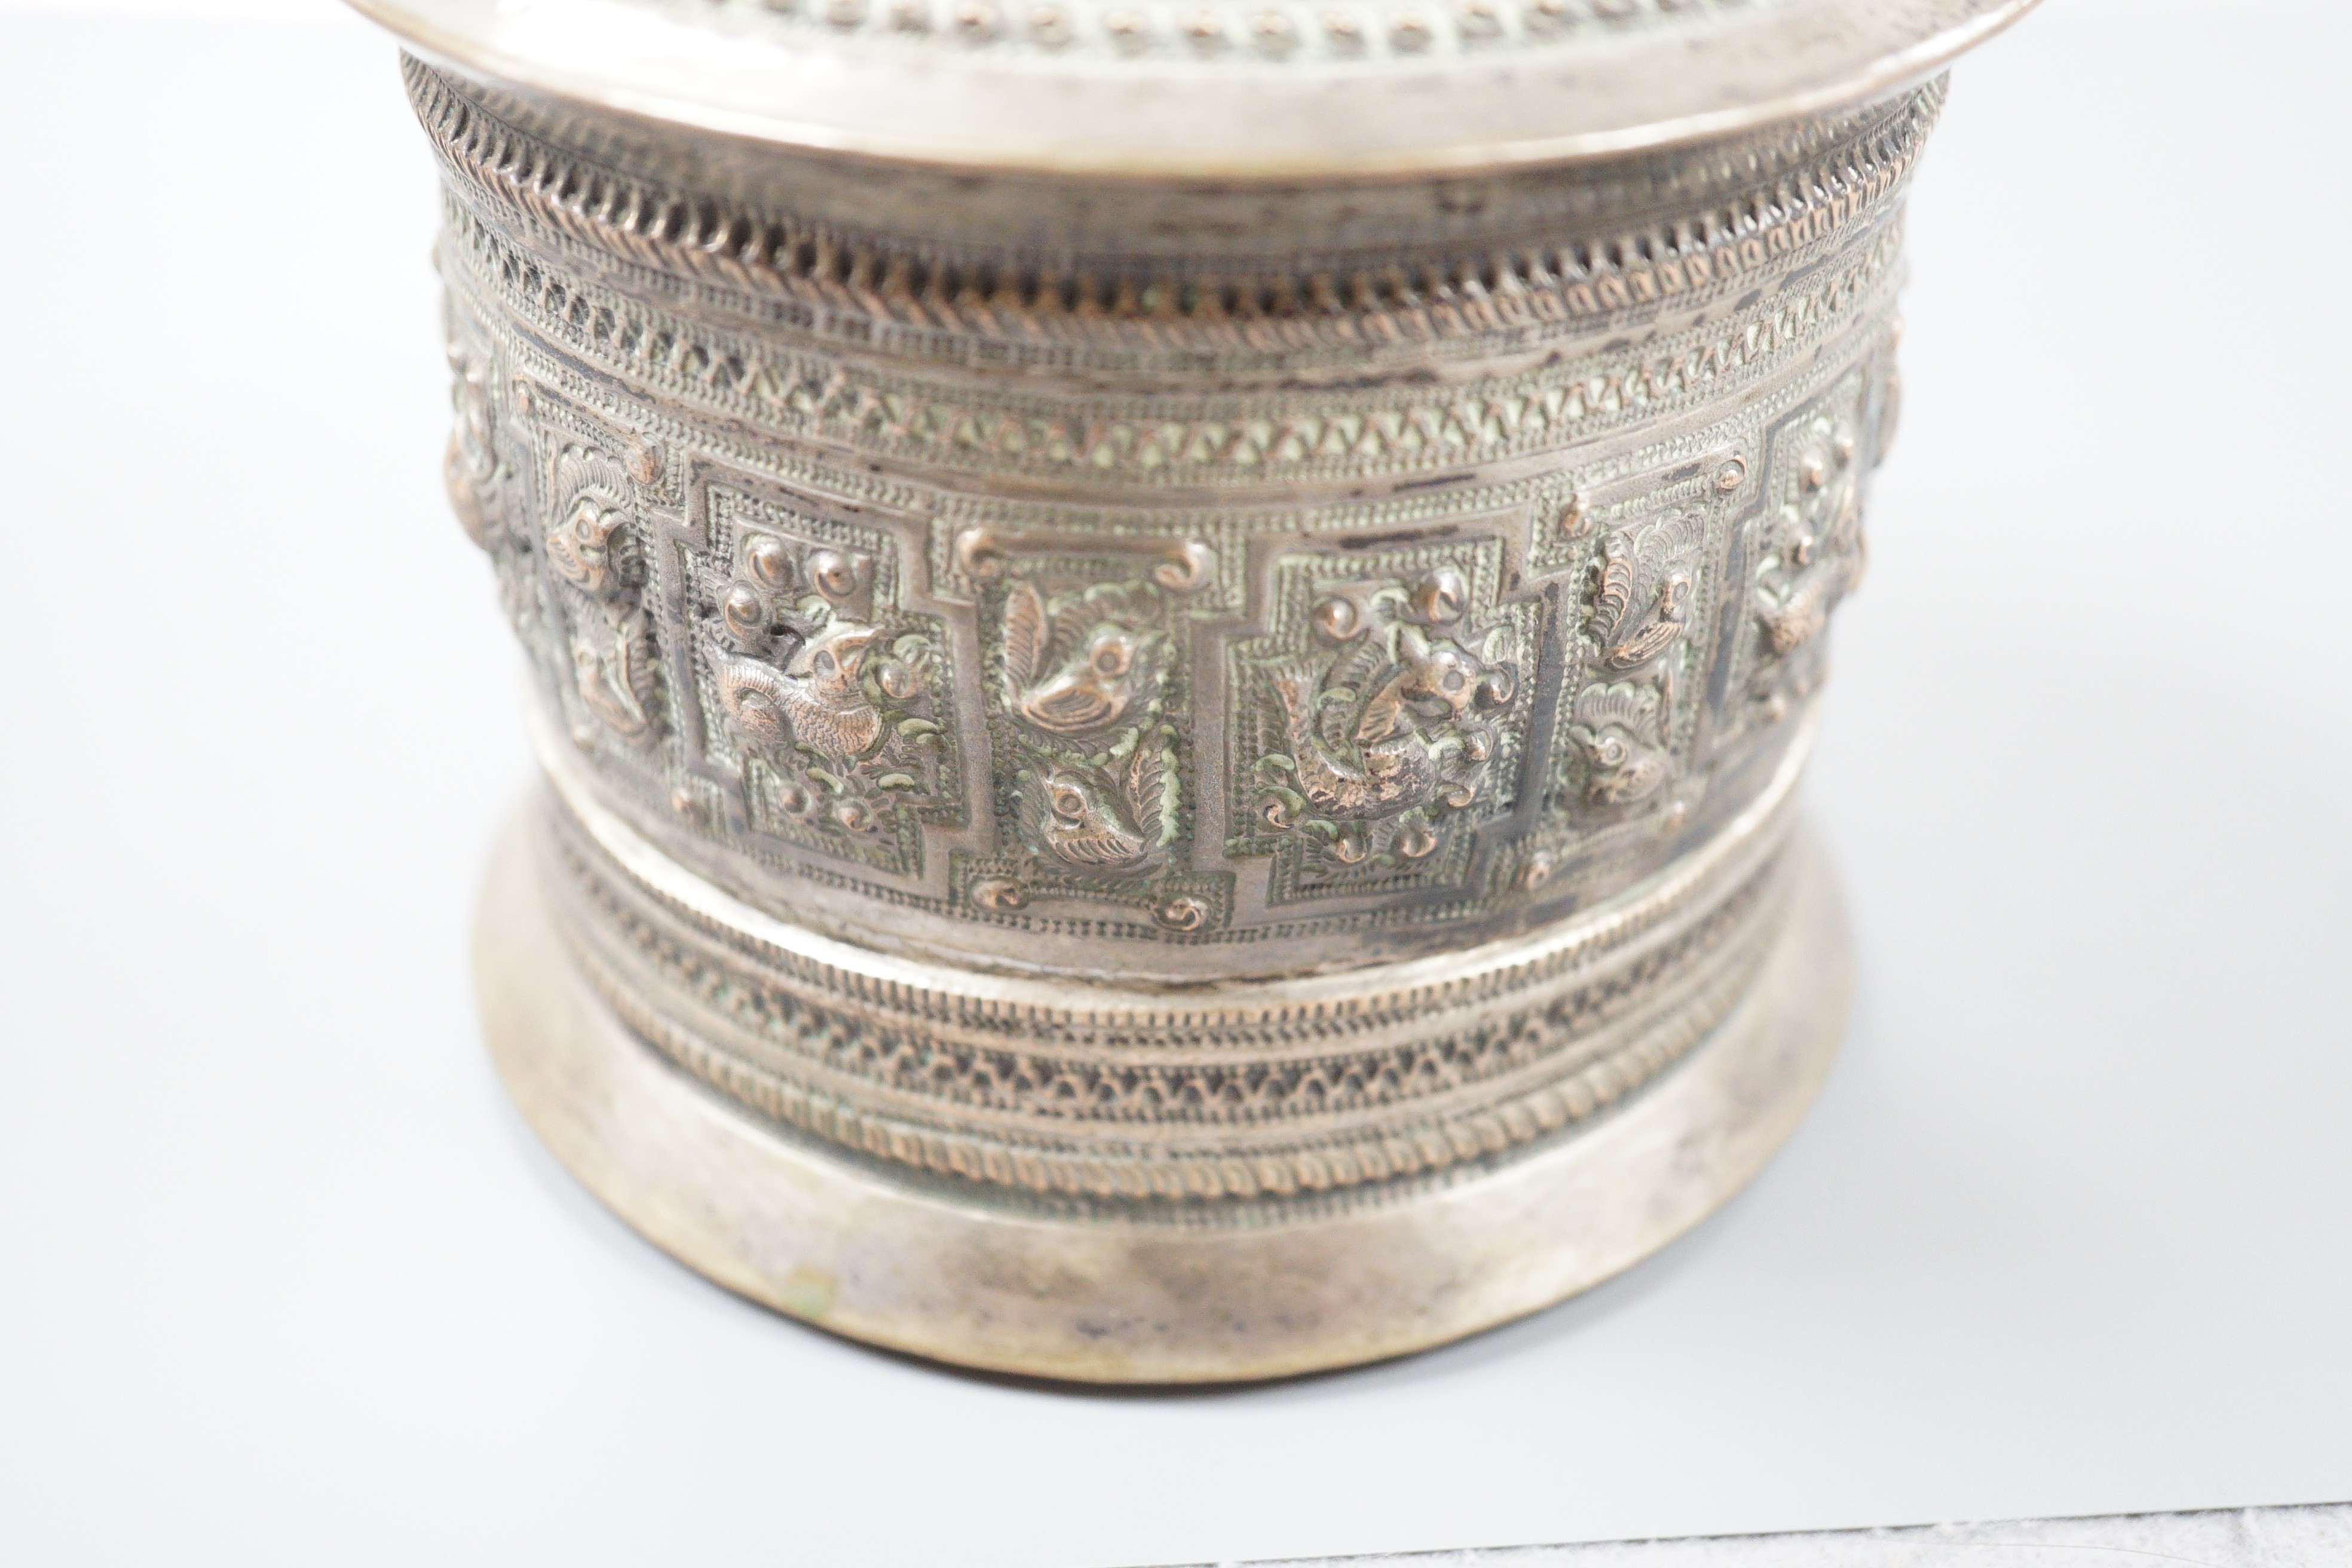 A 19th century Shan people white metal circular betel box and cover, Eastern Burma, height 10.5cm, 266 grams.